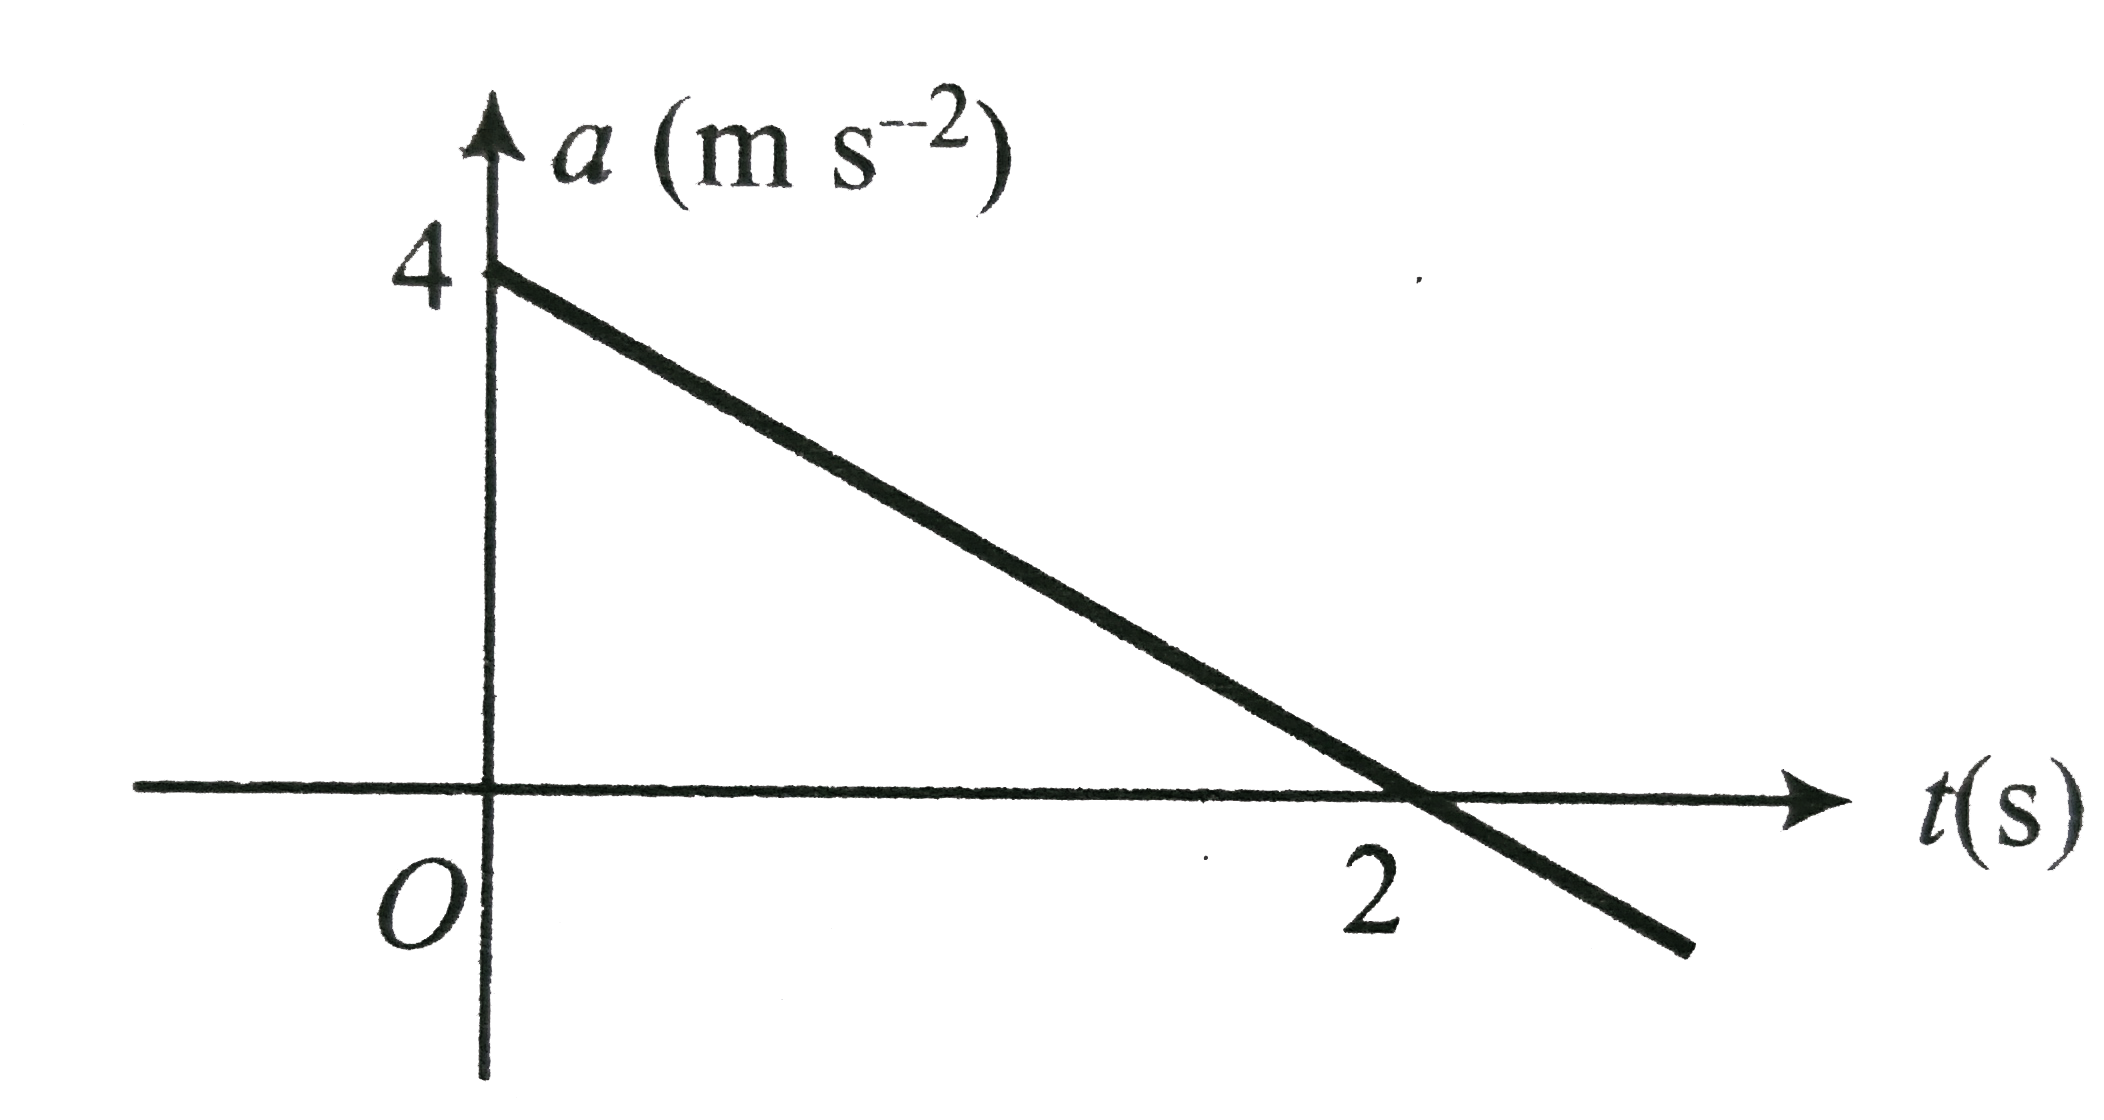 The acceleration versus time graph of a particle moving in a straight line is show in. The velocity-time graph of the particle would be   .